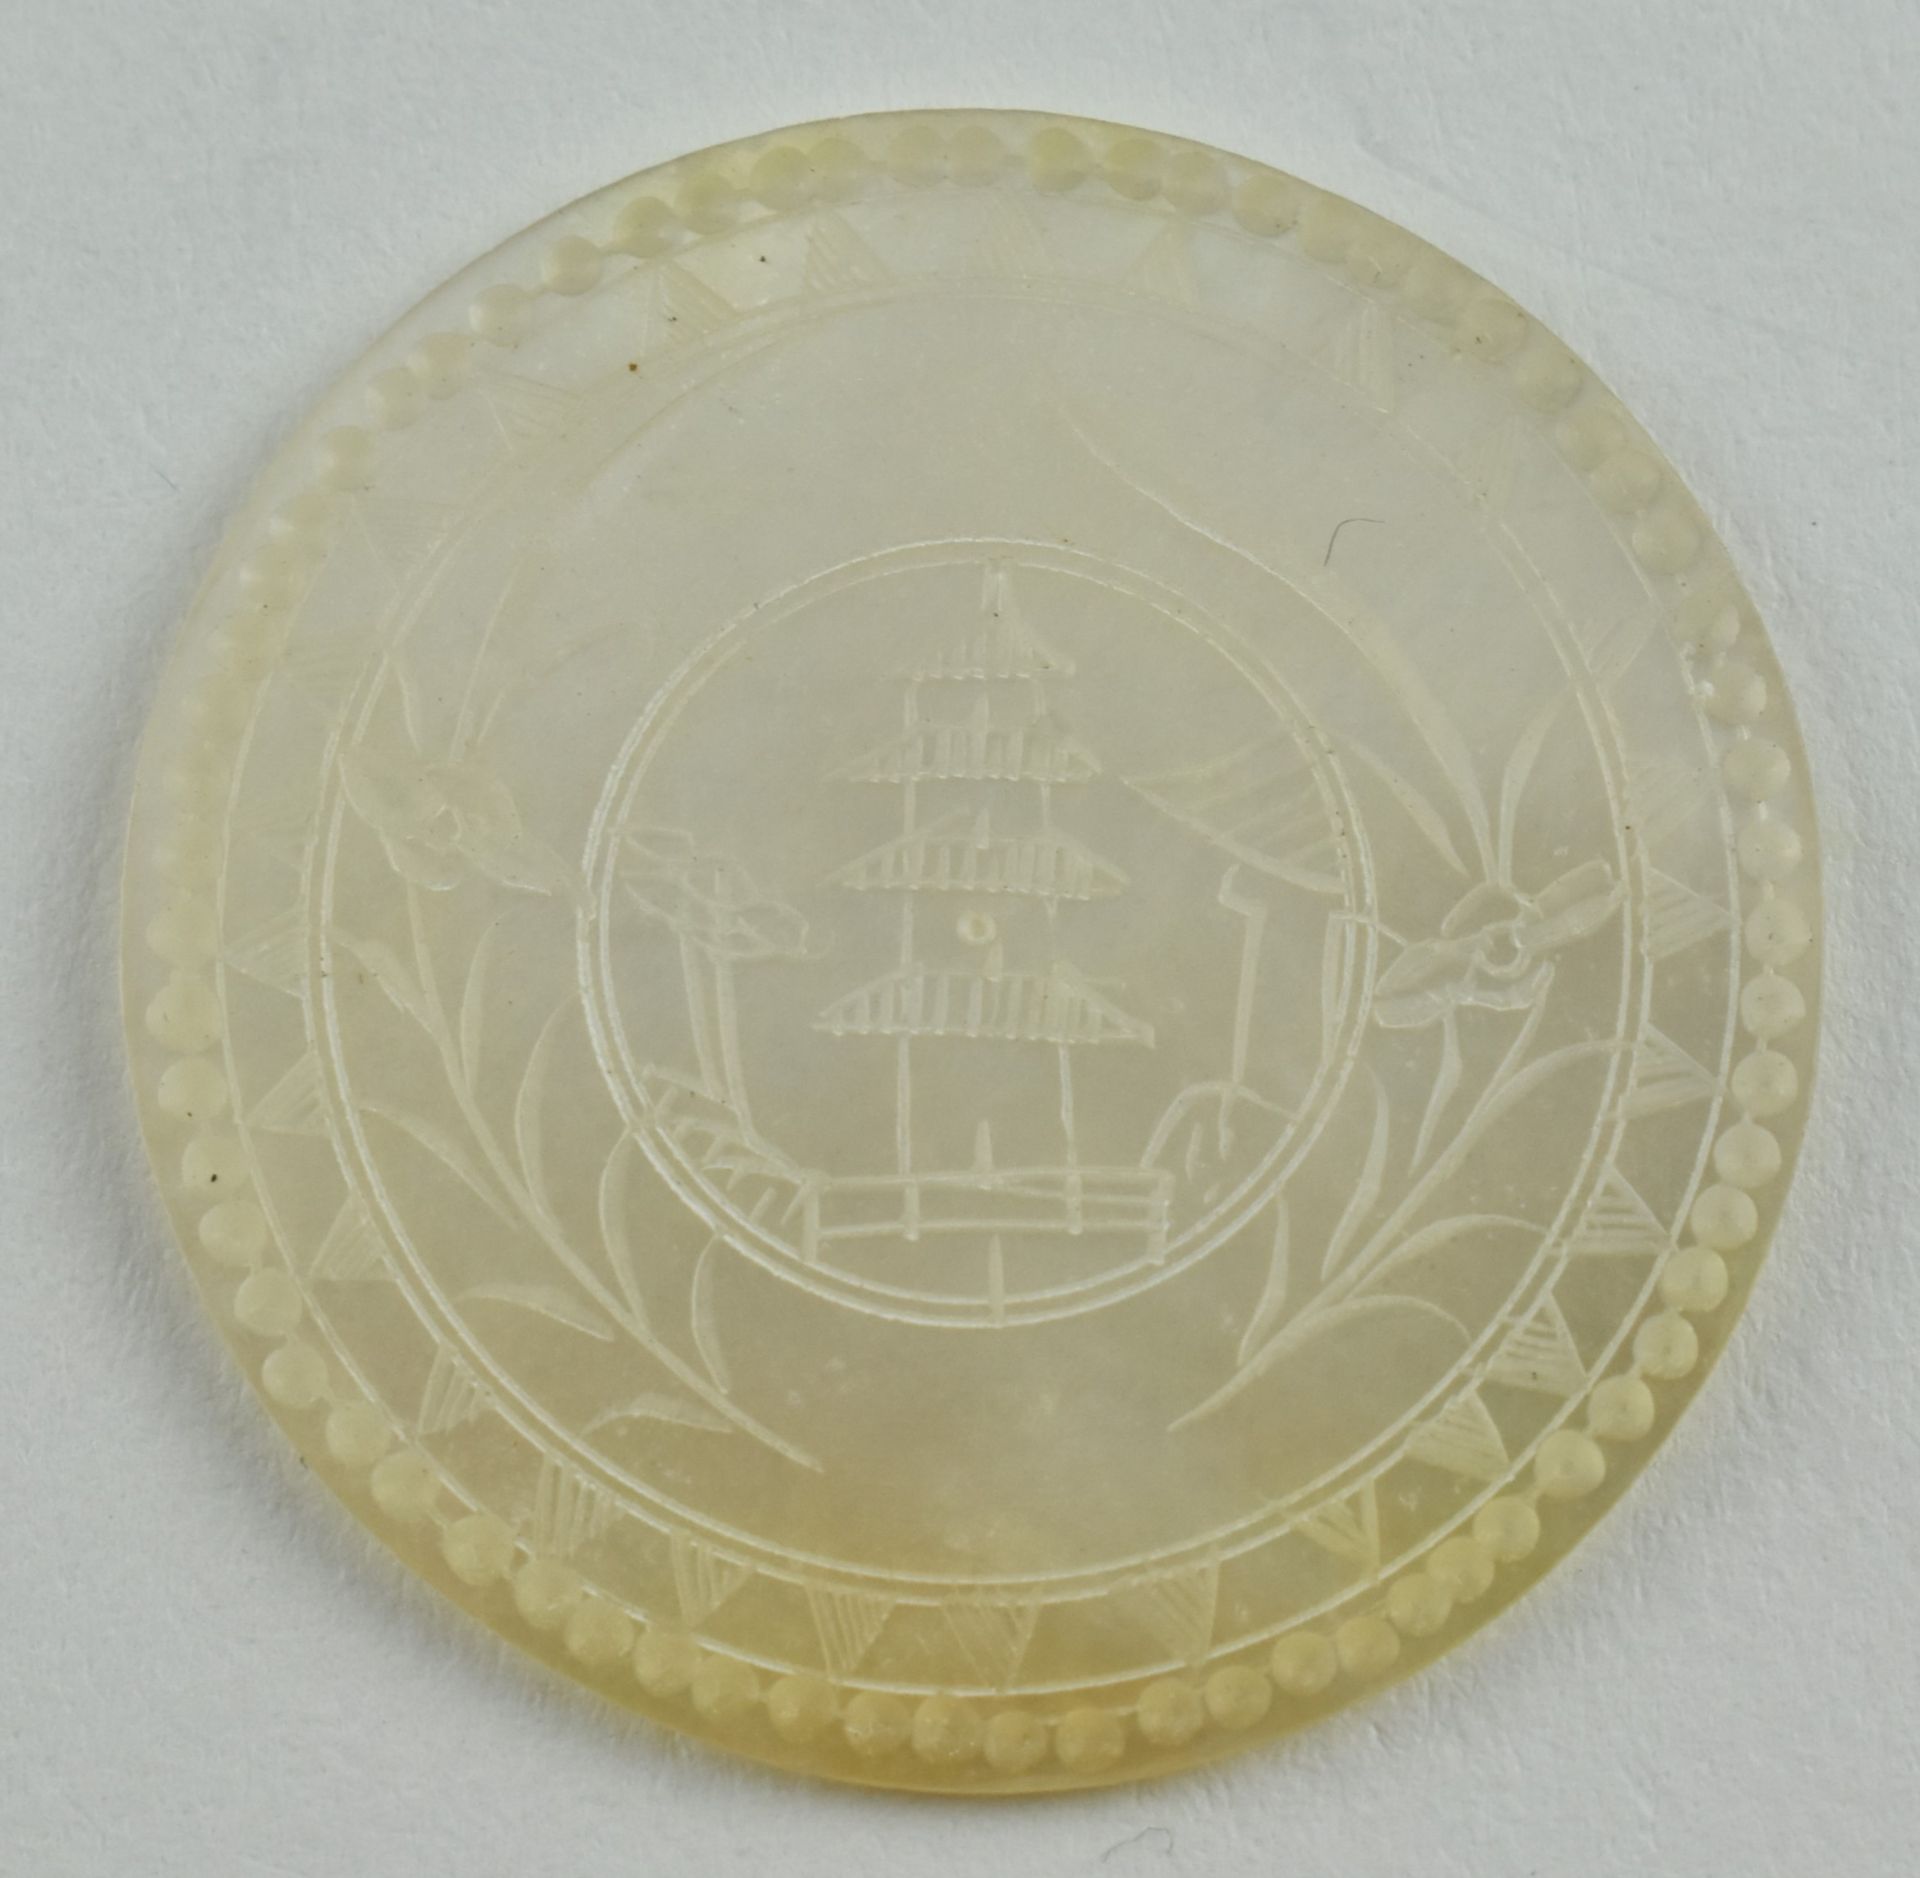 QING DYNASTY MOTHER OF PEARL GAMING TOKENS 清十三行贝母筹码 - Image 5 of 11